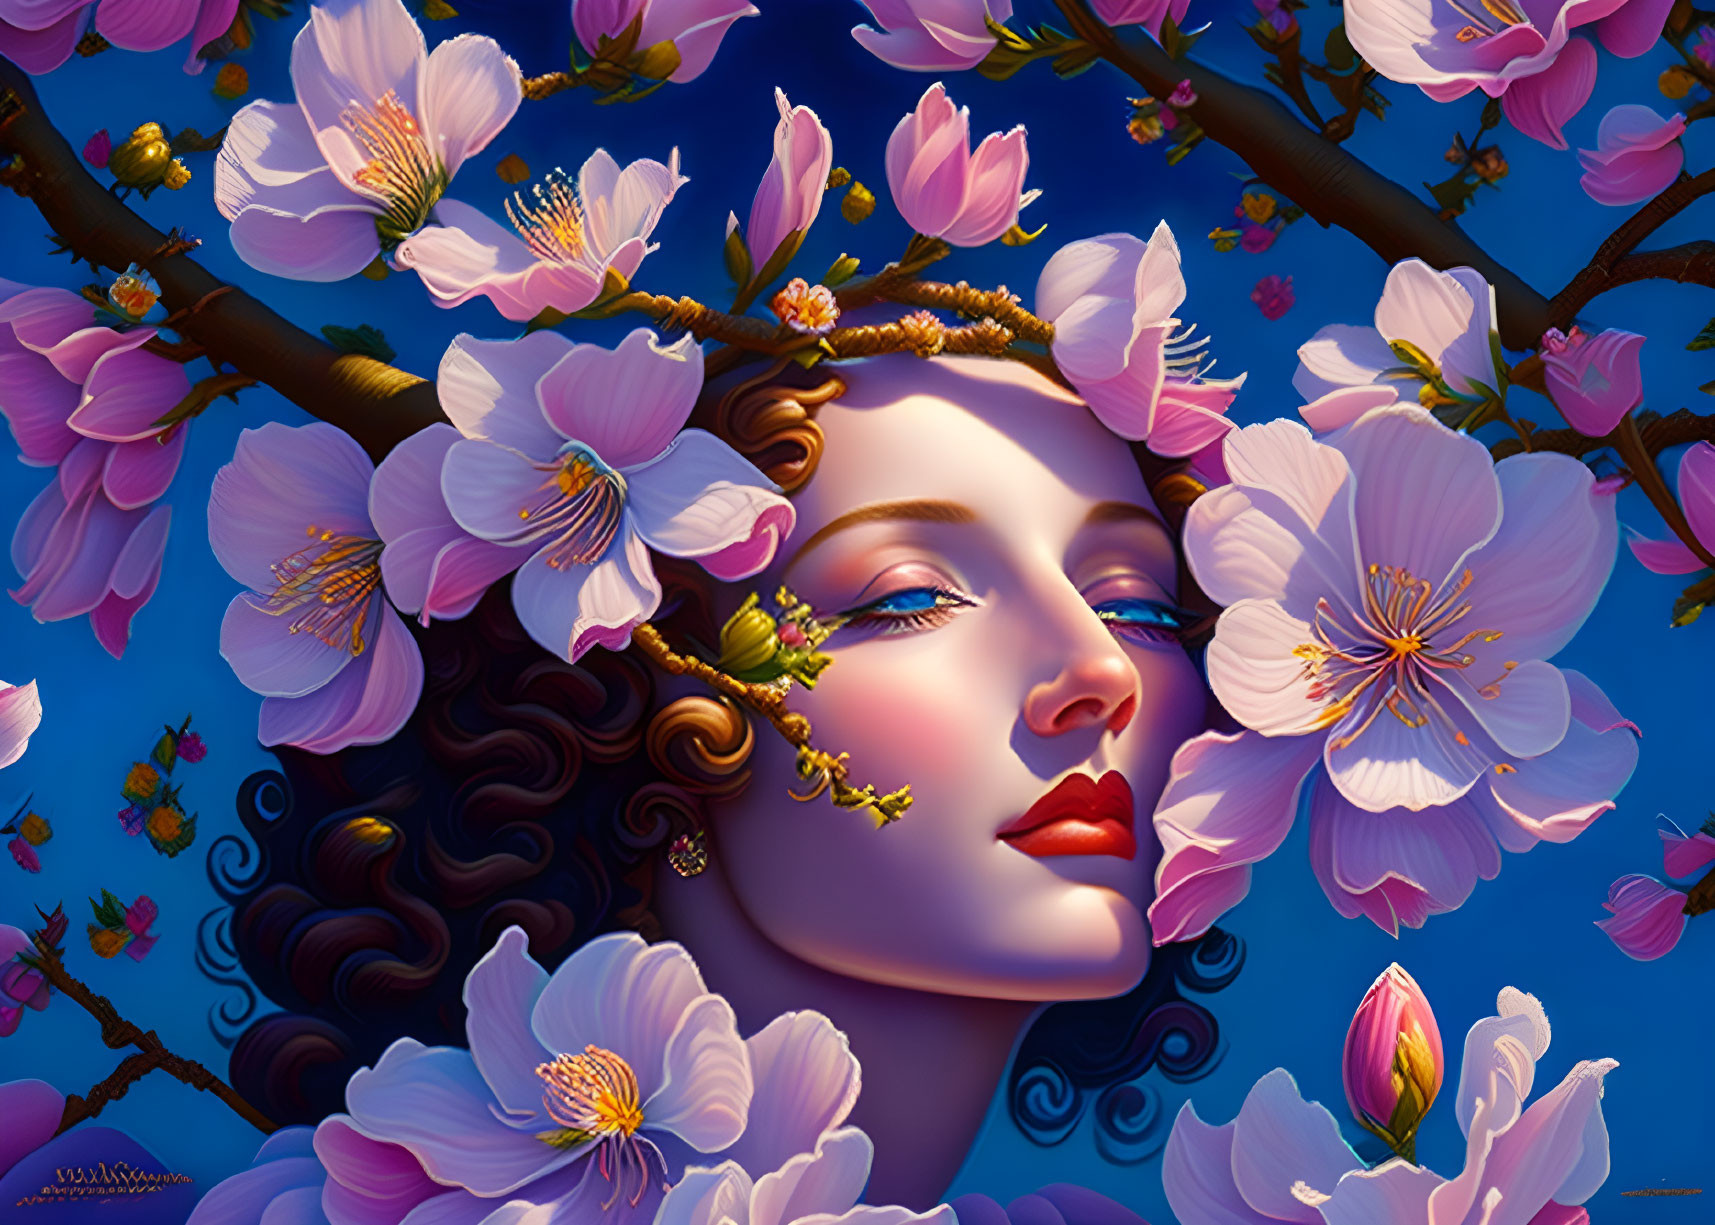 Illustration of woman's face with pink cherry blossoms on blue background